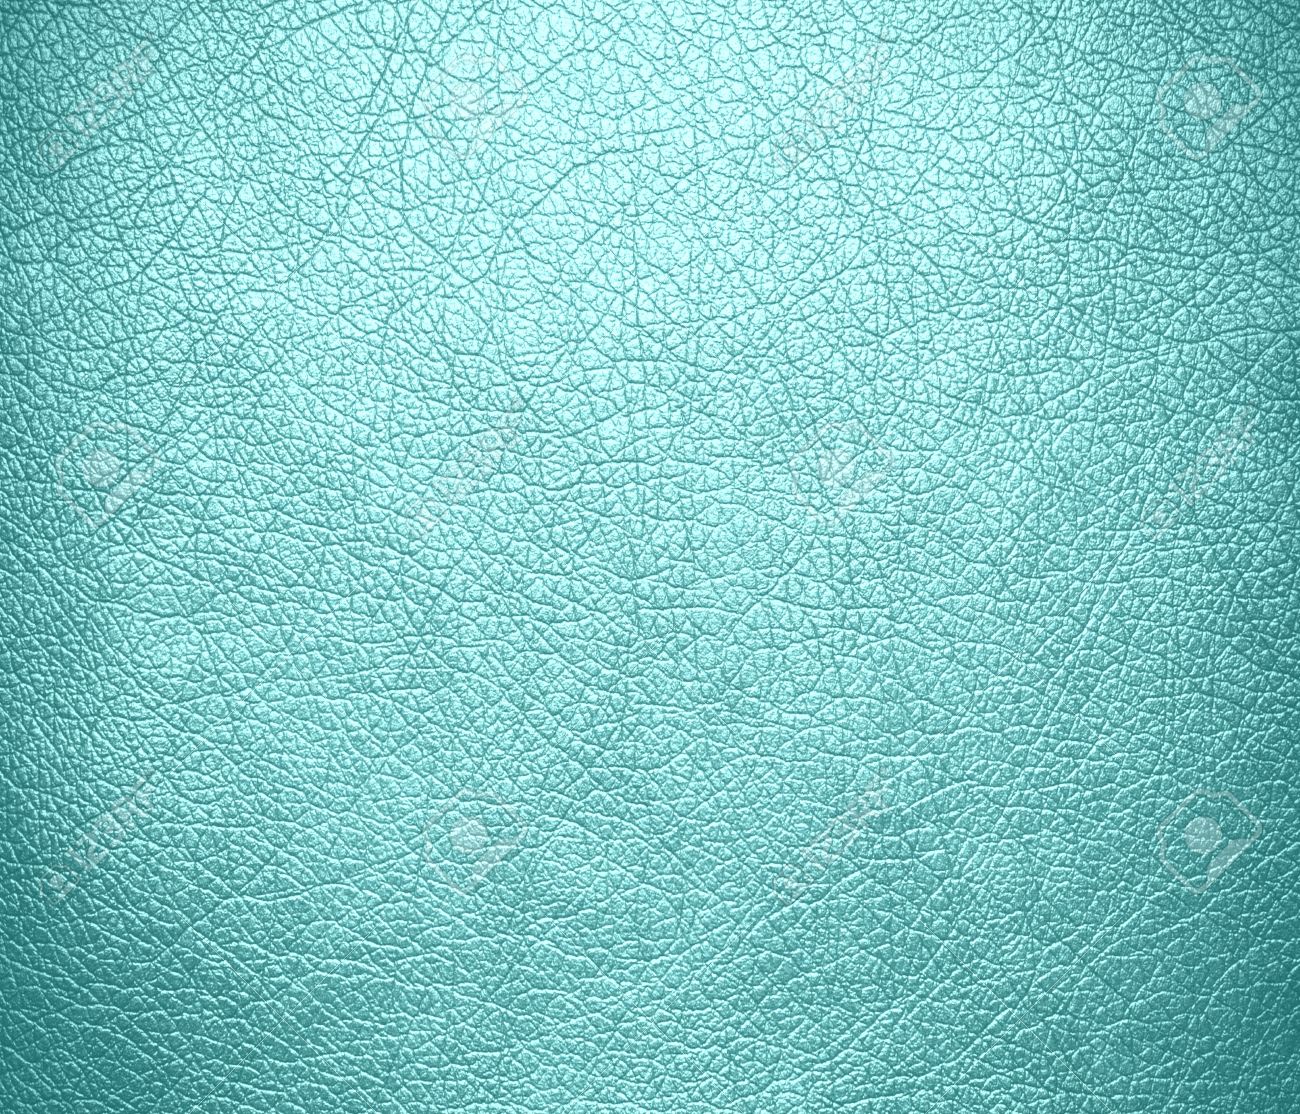 Celeste Leather Texture Background Stock Photo Picture And